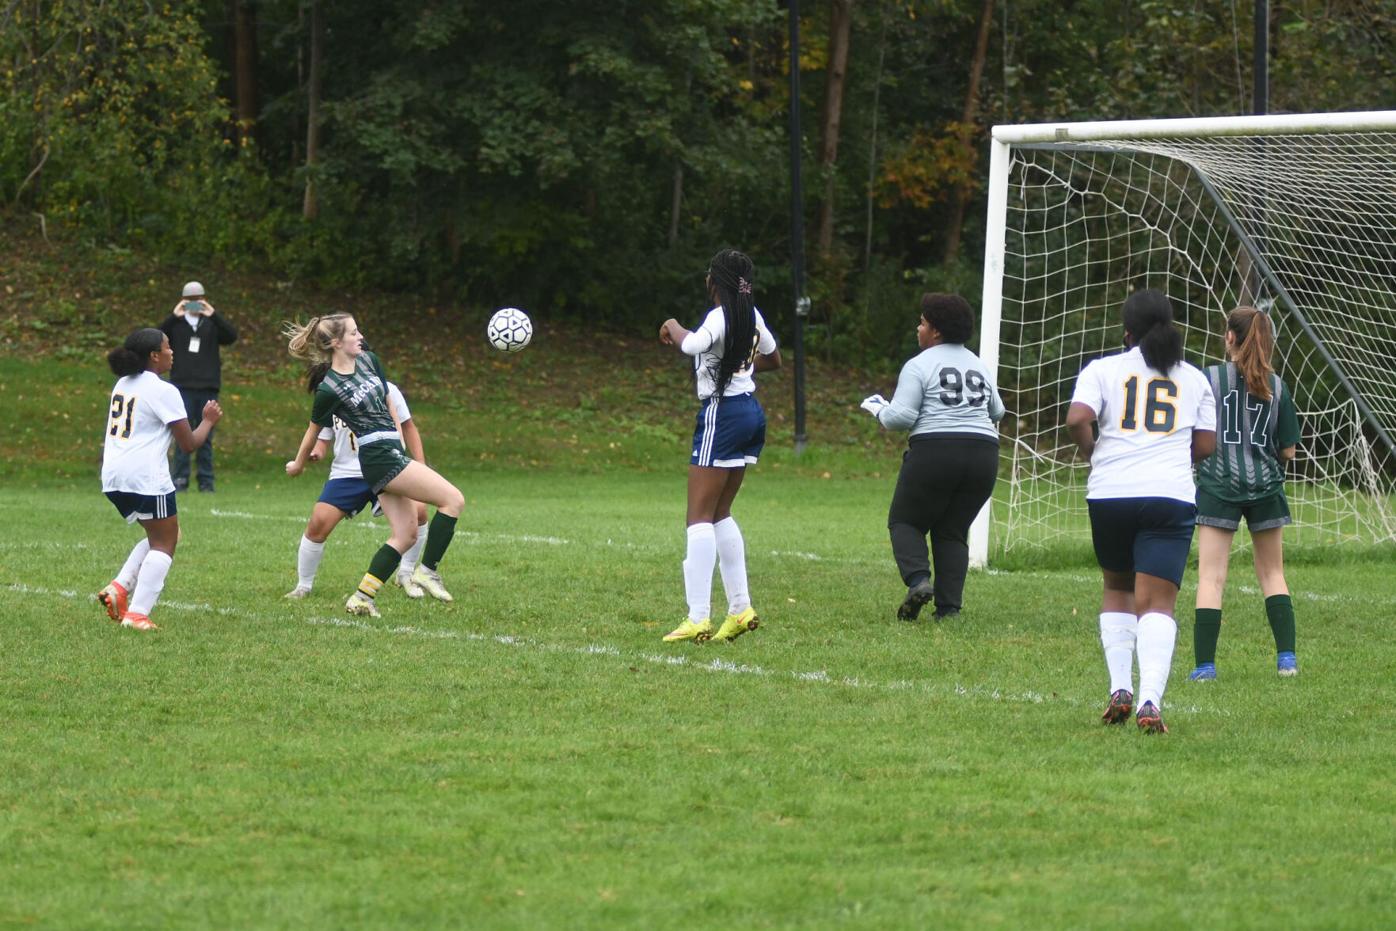 Izzy LaCasse kicks the ball at the net for a goal